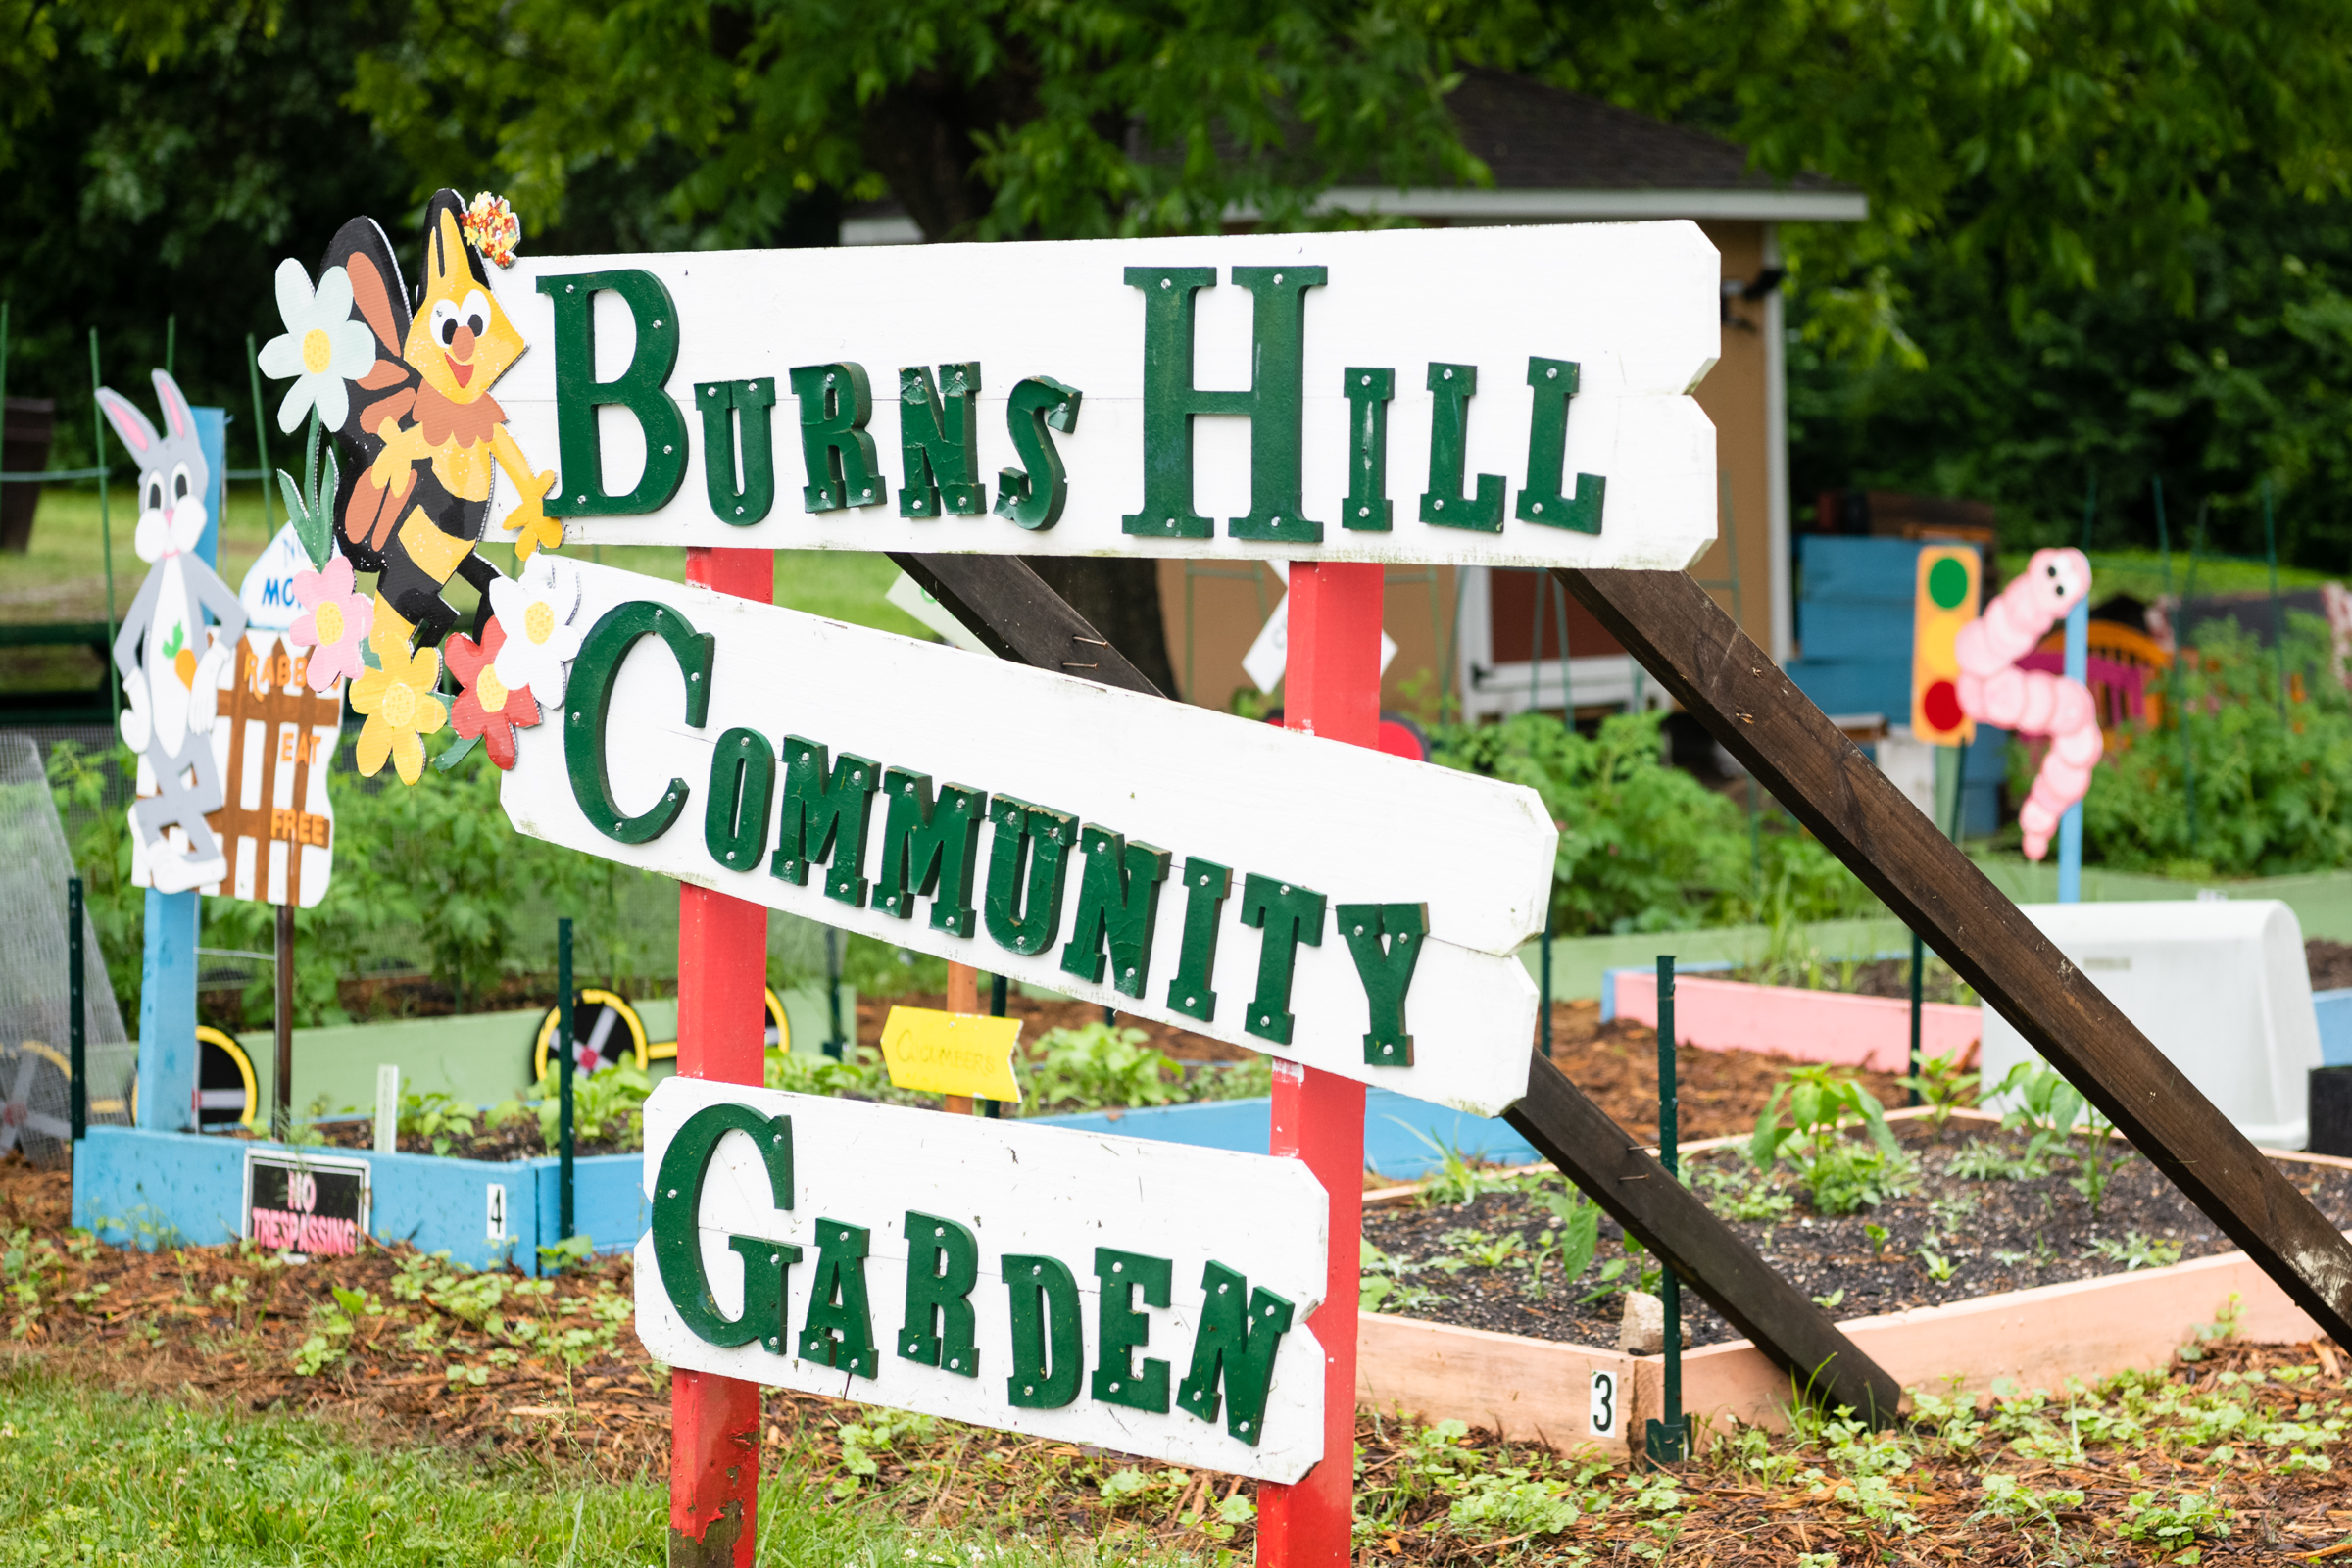 Burns Hill Community Garden is located in High Point, NC and works to combat food insecurity in High Point.